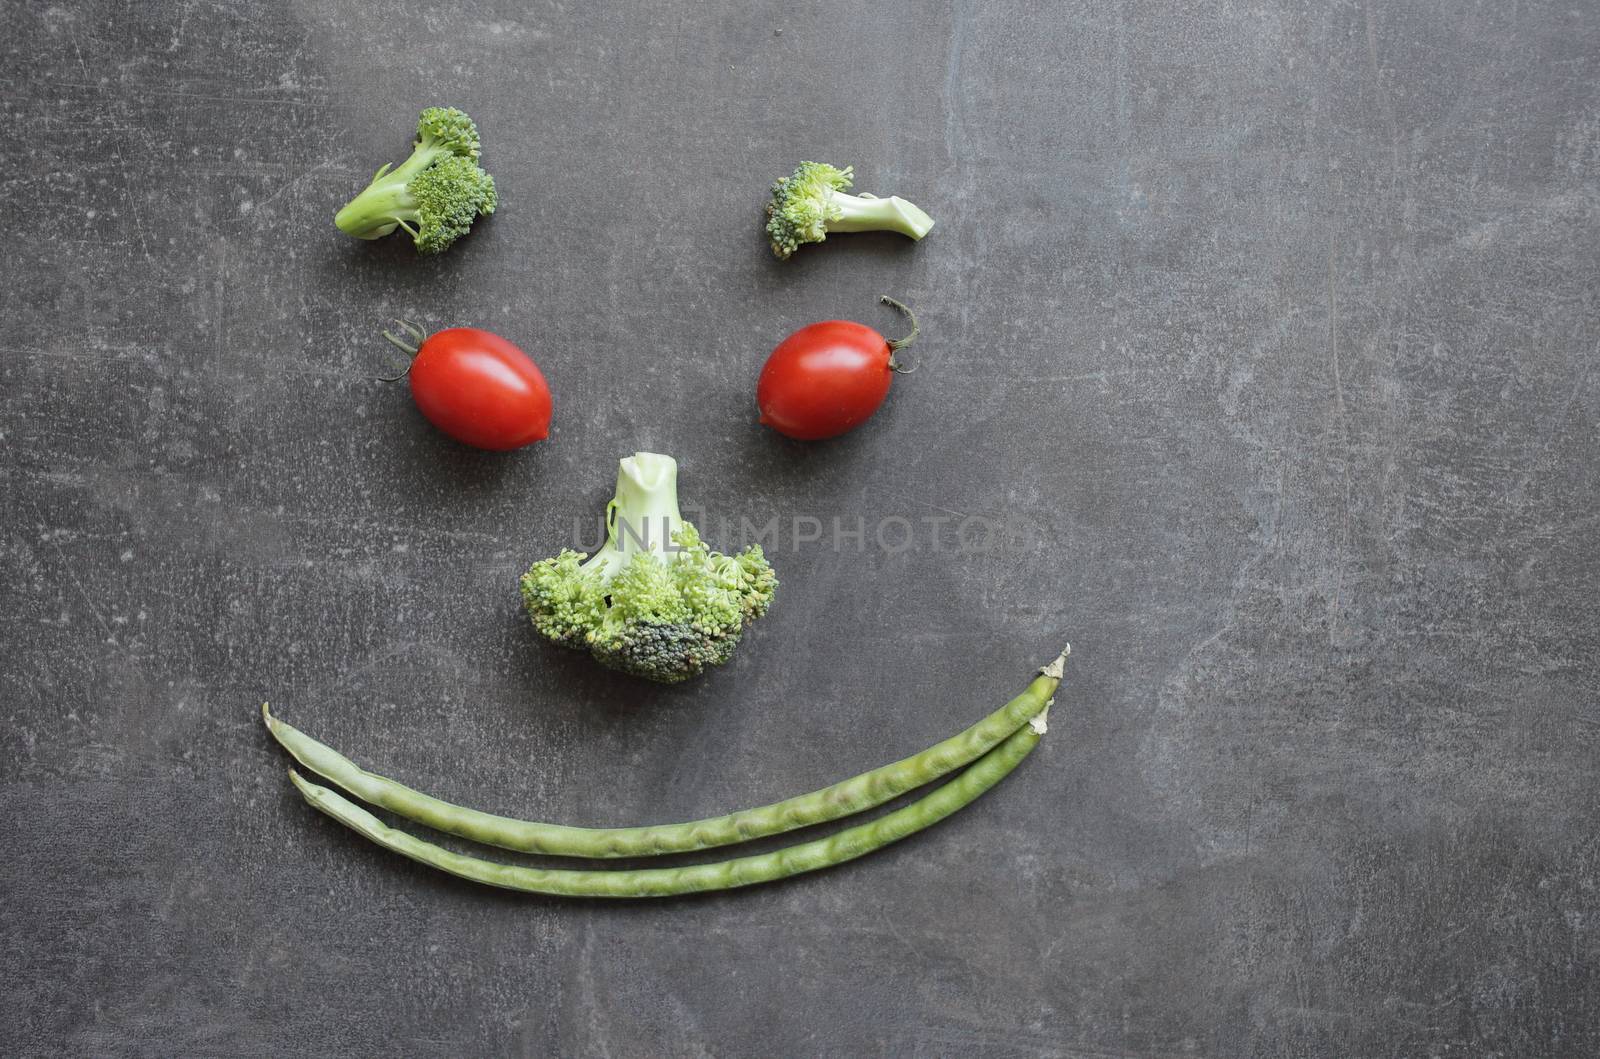 Smiling emoticon of fresh vegetables cherry tomatoes broccoli and green beans by selinsmo